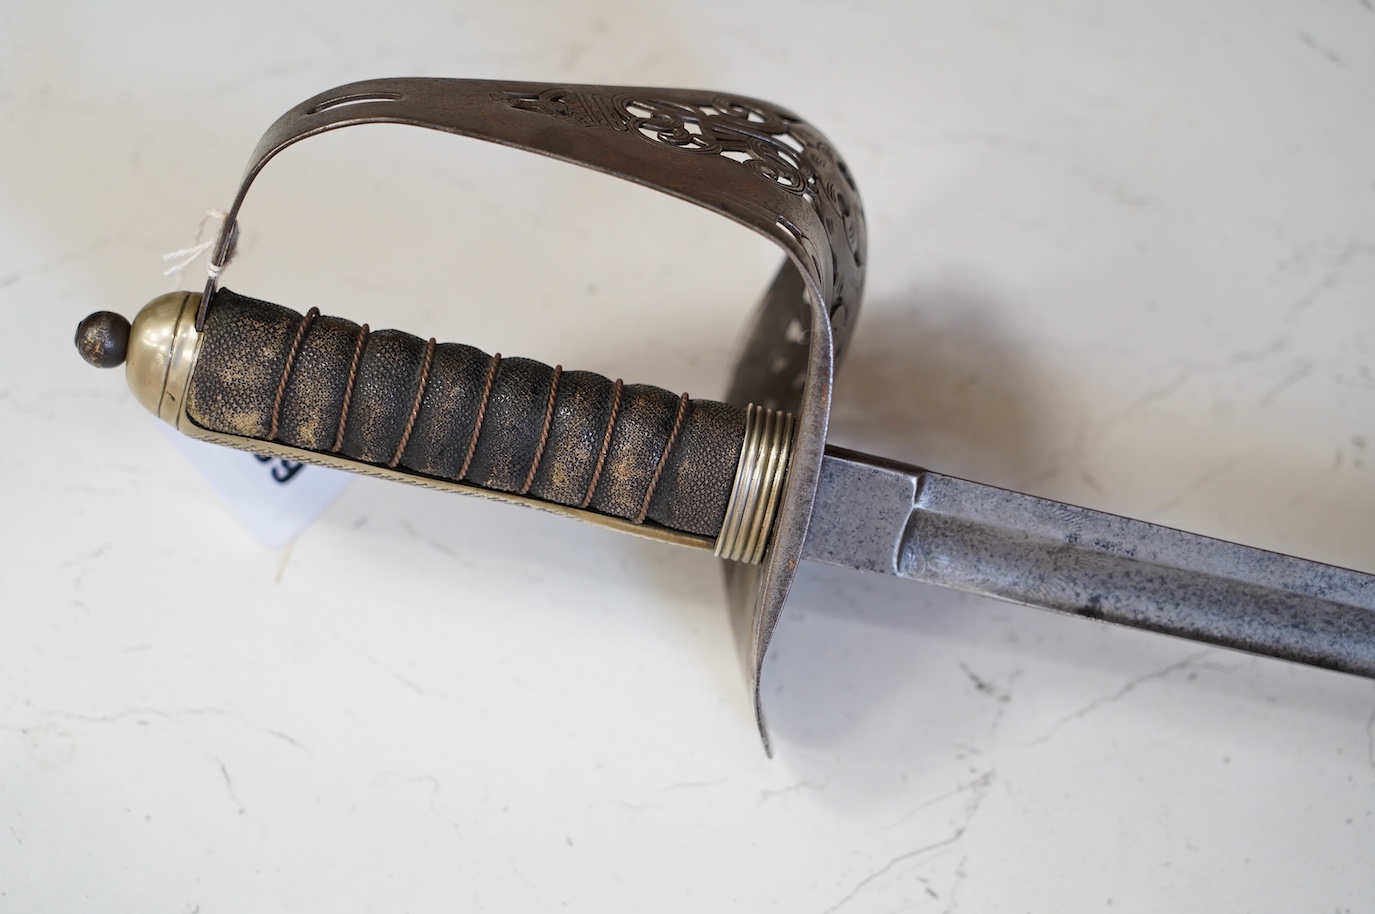 An 1897 pattern infantry officer’s sword, blade etched with crowned VR cypher, steel guard with GVR cypher, blade 83cm. Condition - fair, generally worn